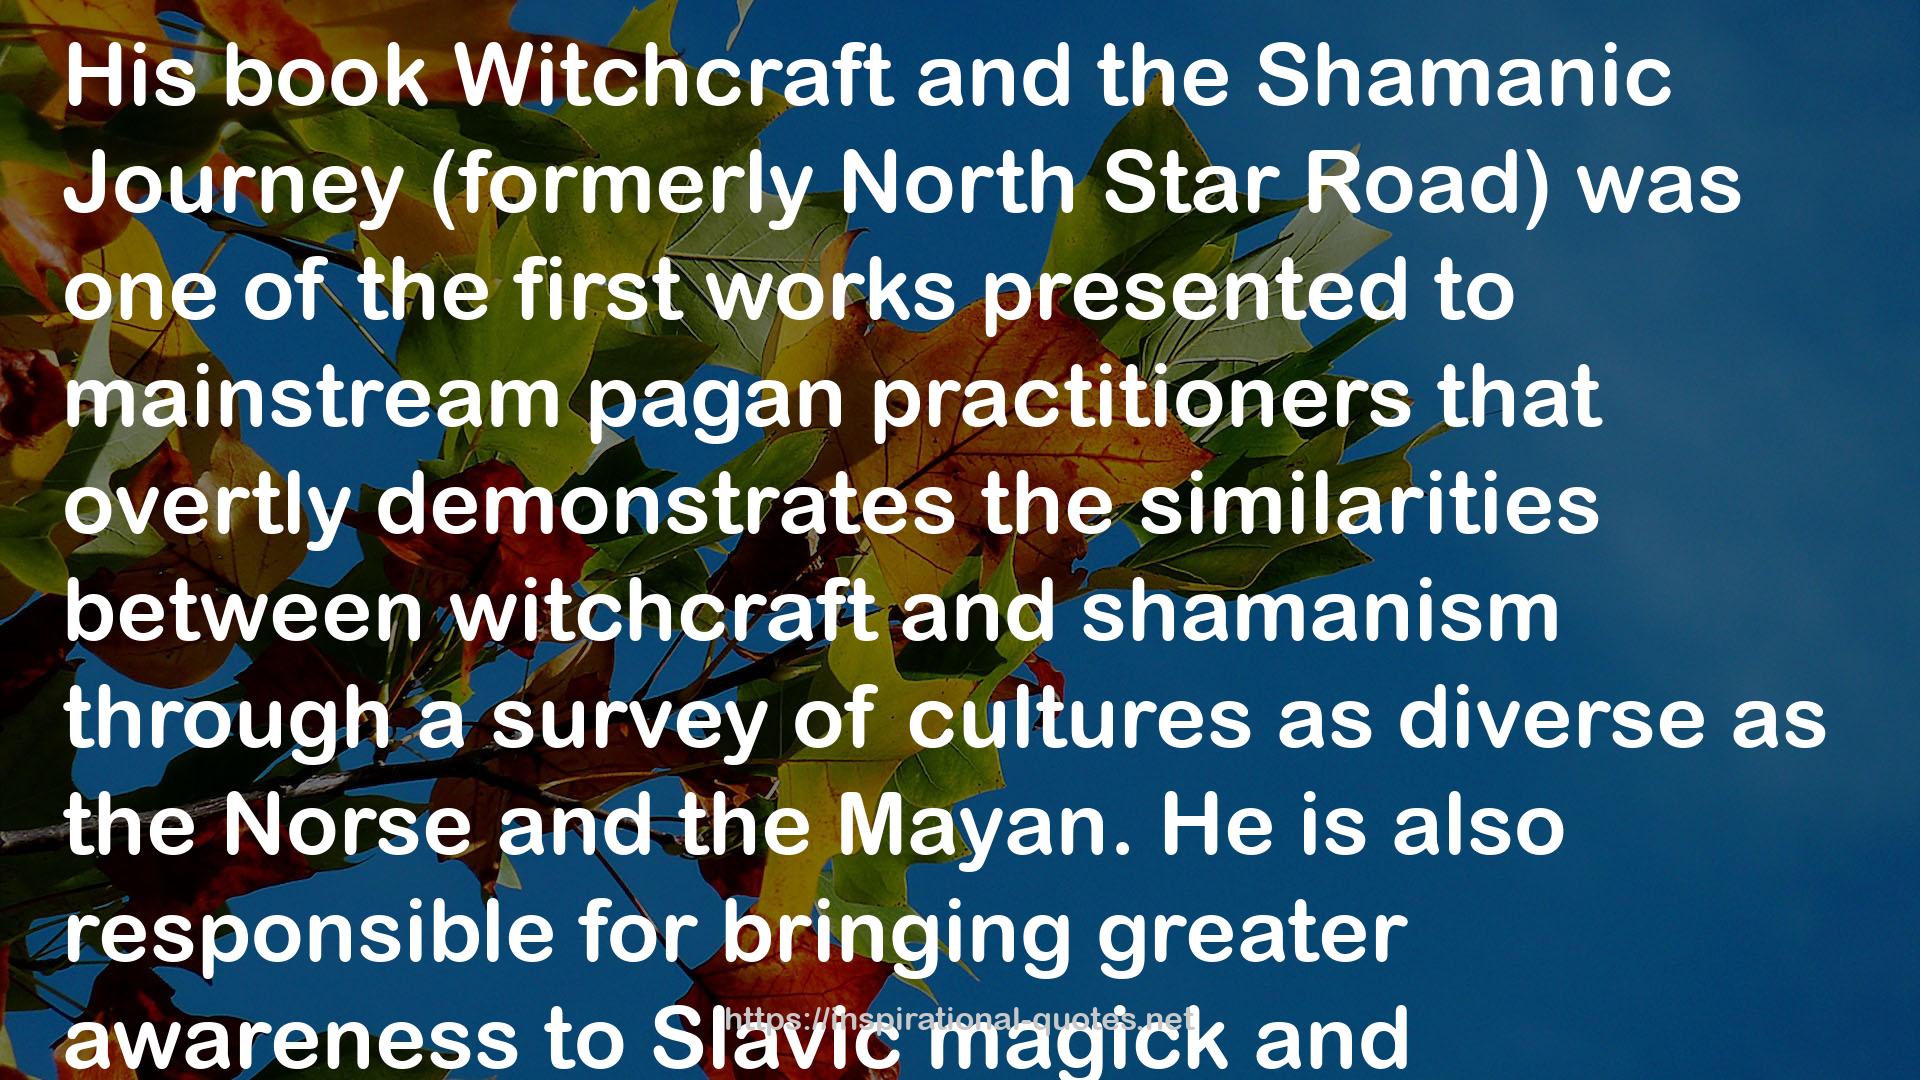 The Temple of Shamanic Witchcraft: Shadows, Spirits and the Healing Journey (Temple of Witchcraft, #3) QUOTES